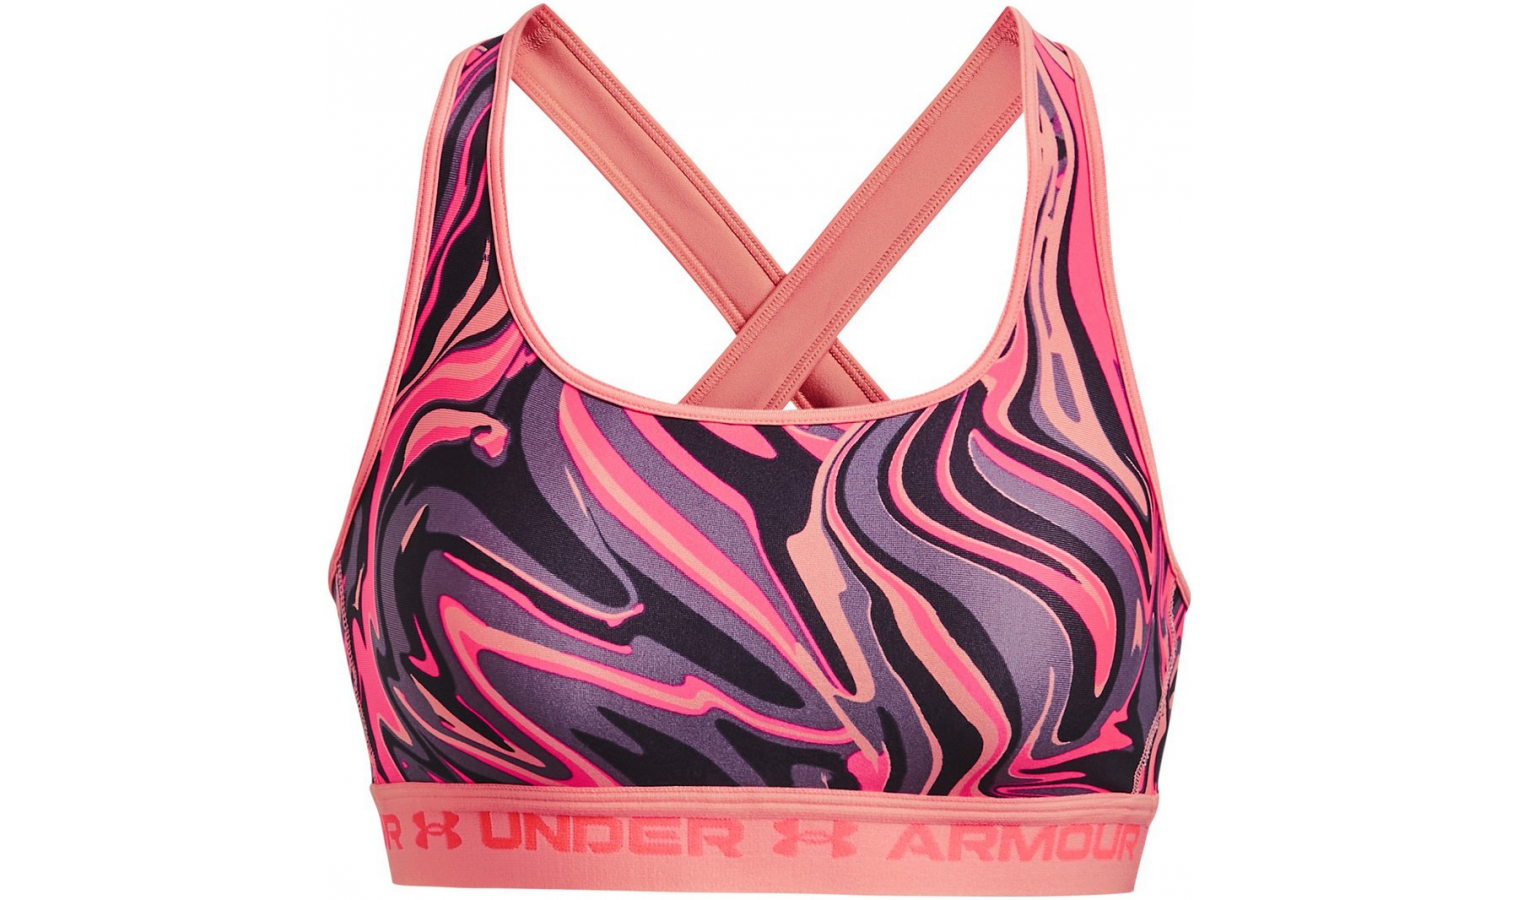 Under Armour - Women's Armour® Mid Crossback Mid Printed Sports Bra